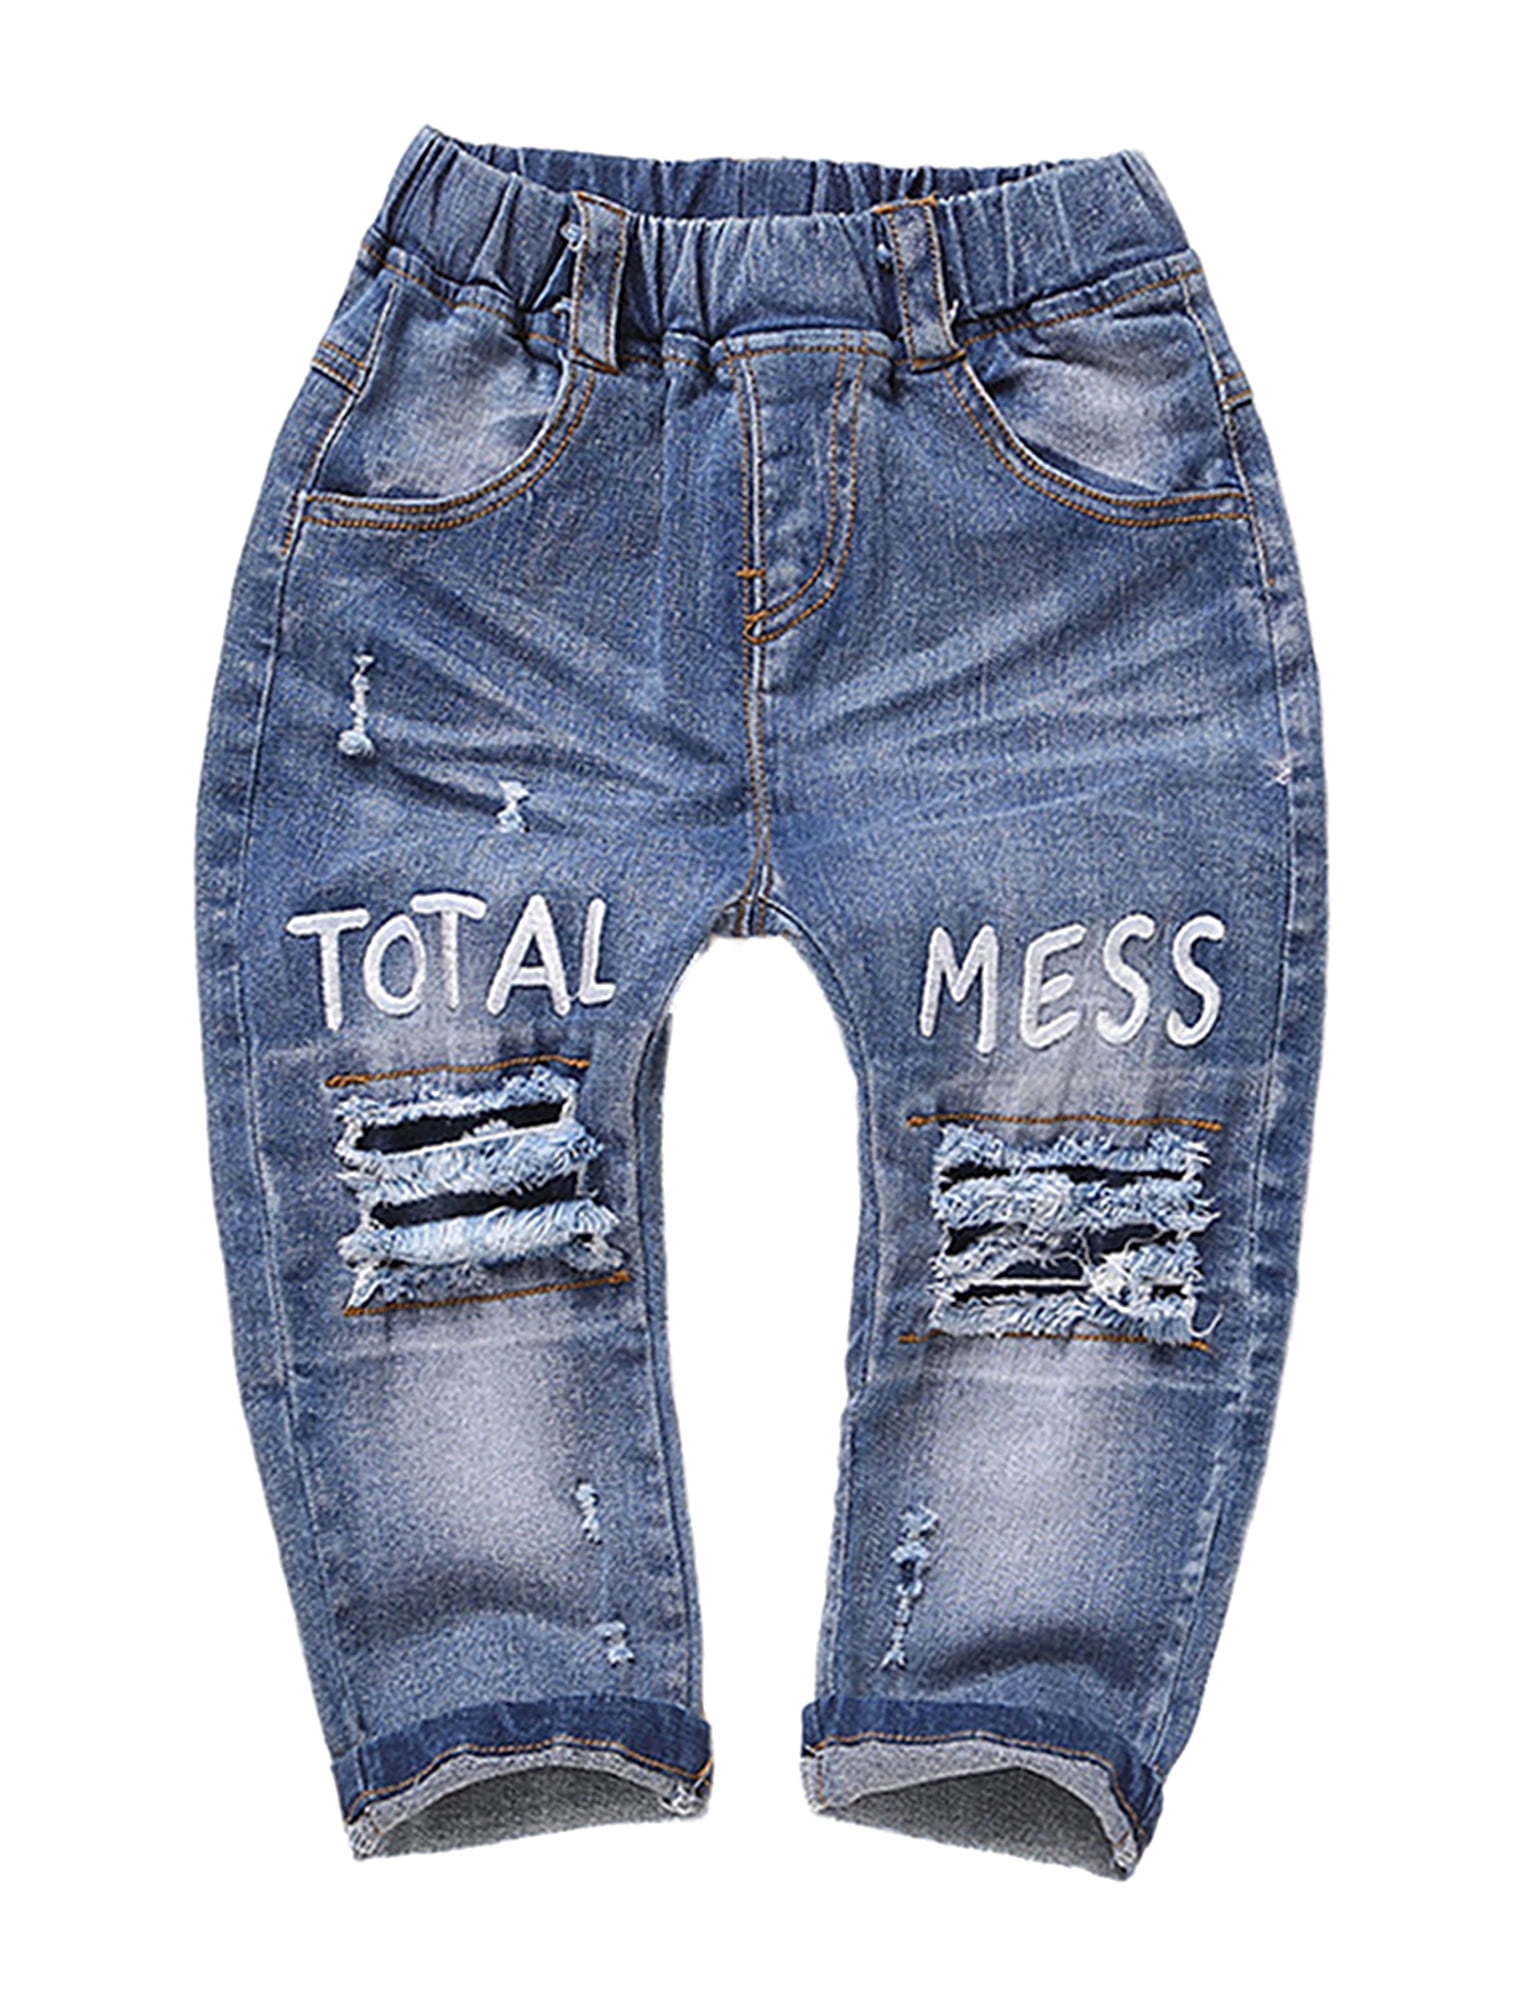 KIDSCOOL SPACE Retro Toddler Little Child Rippd Holes Elastic Waist Fashion Jeans